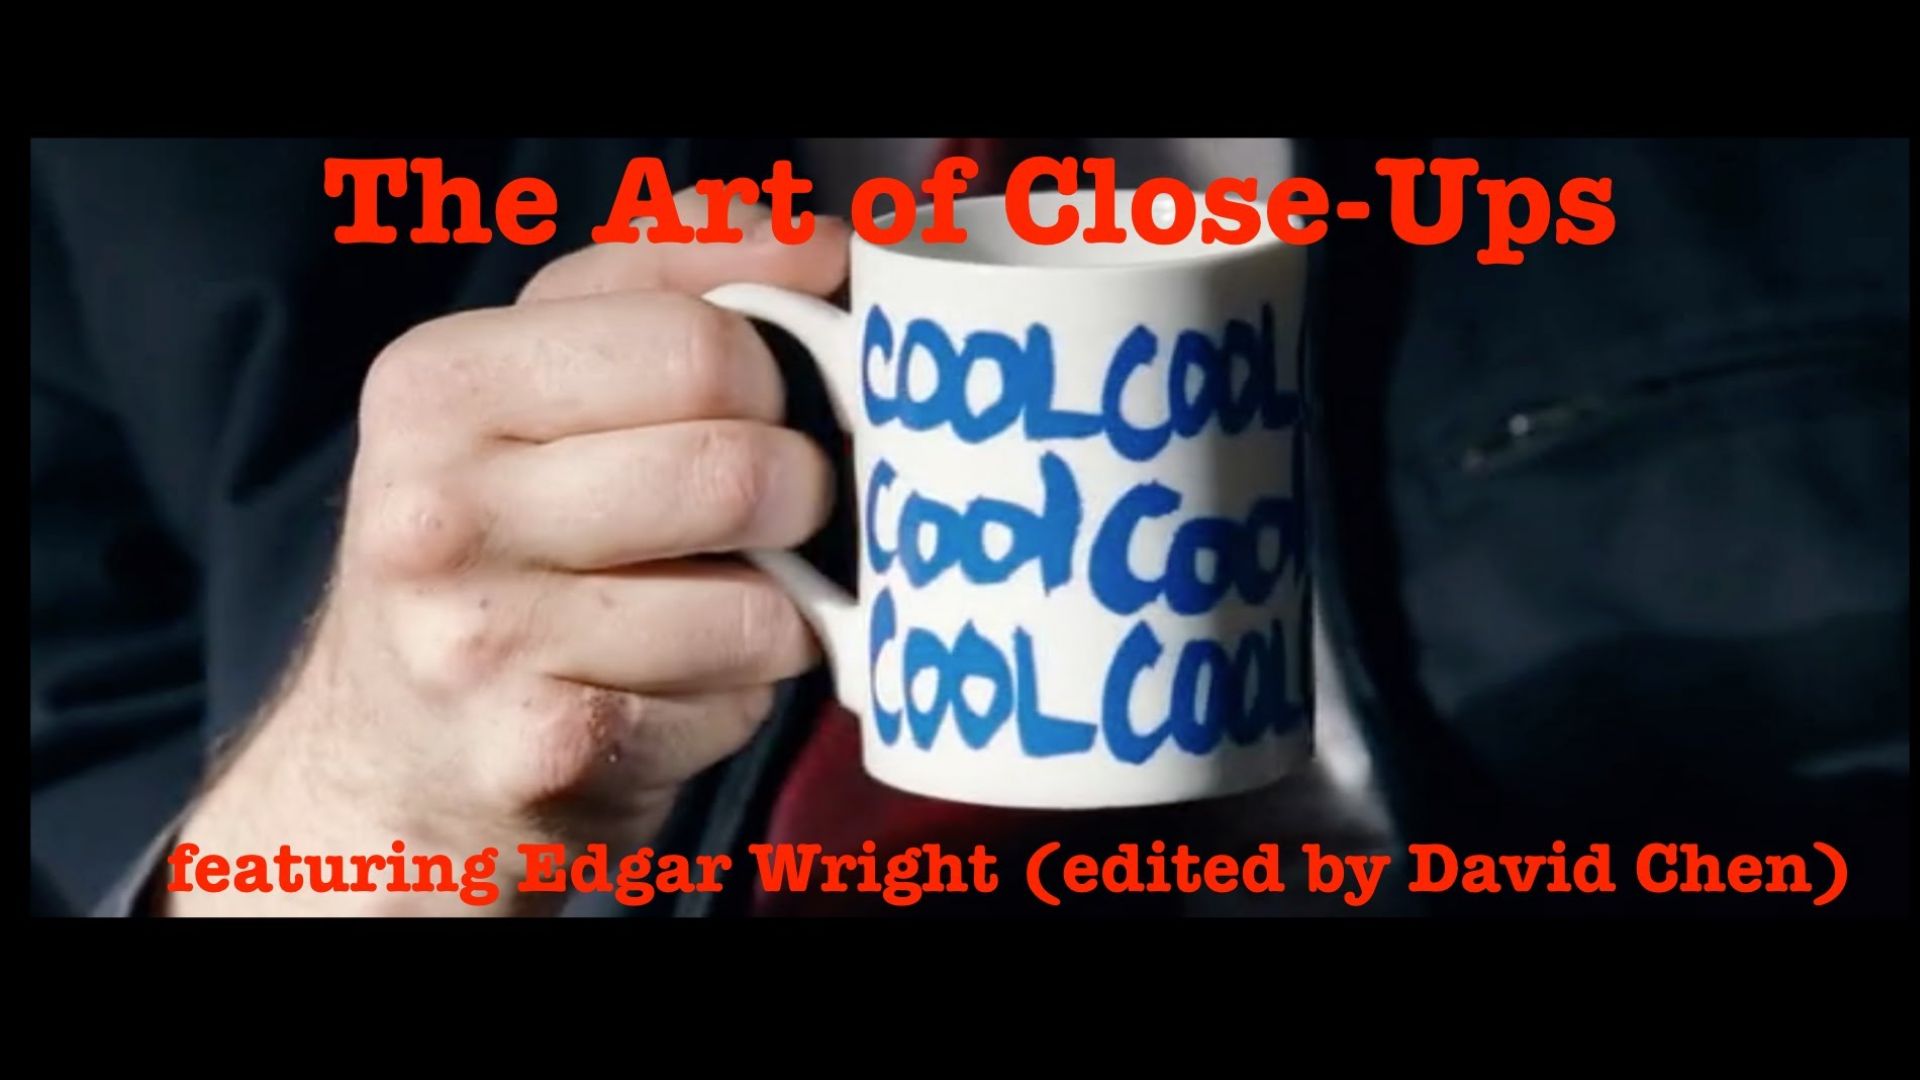 The Art of the Close-Up with Edgar Wright